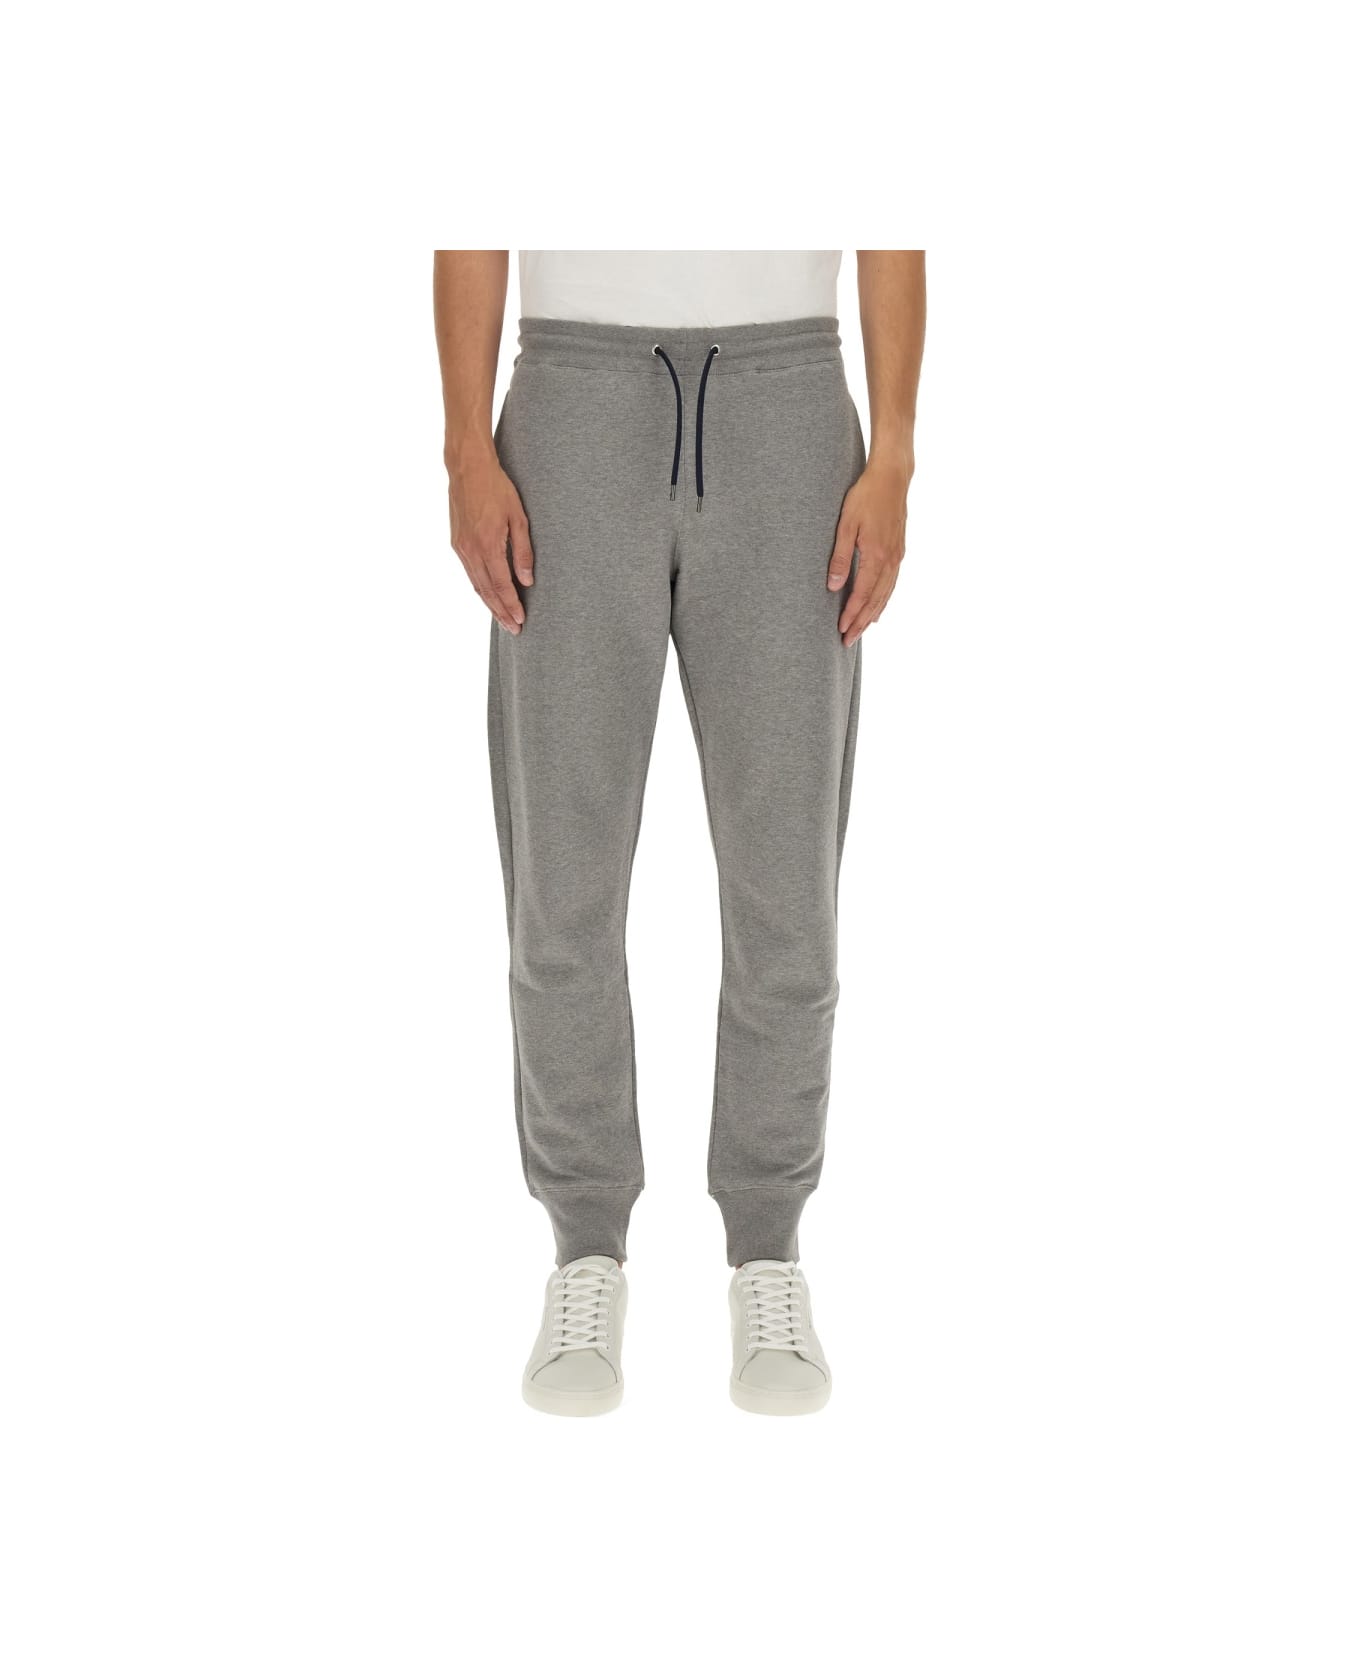 PS by Paul Smith Jogging Pants - GREY